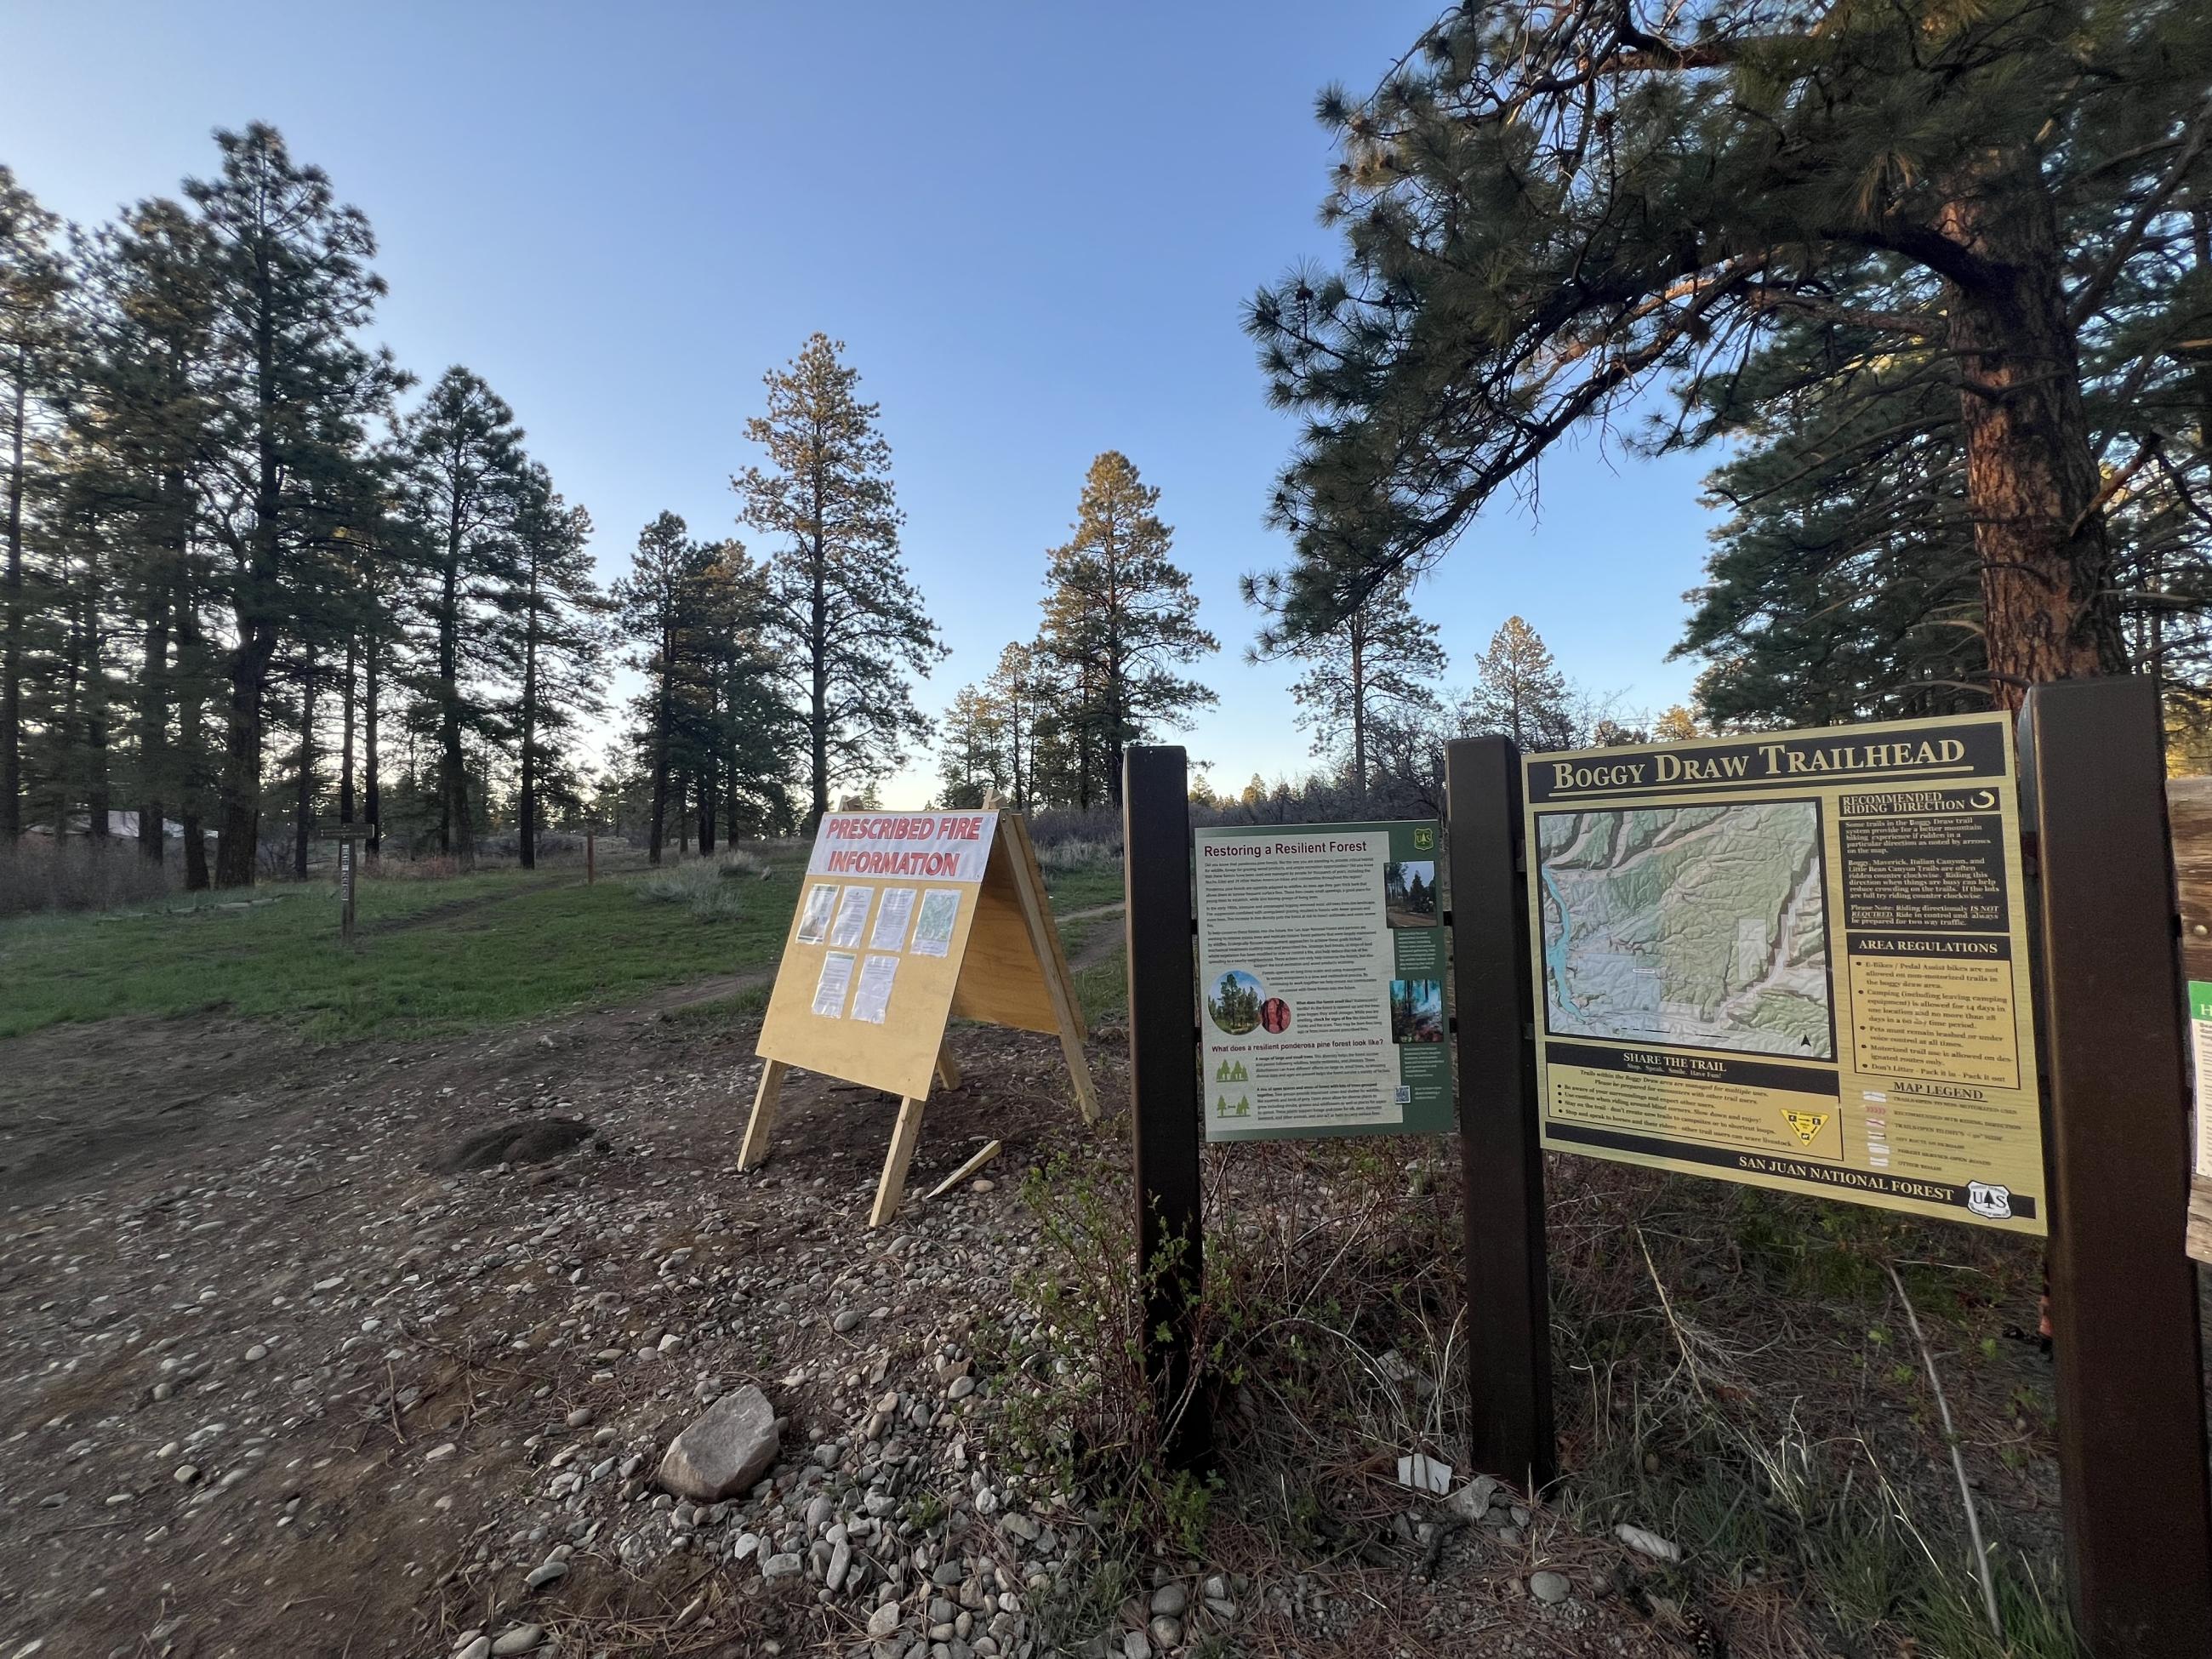 Photo showing the Boggy Draw Trailhead where prescribed burns may take place on May 9 and 10.